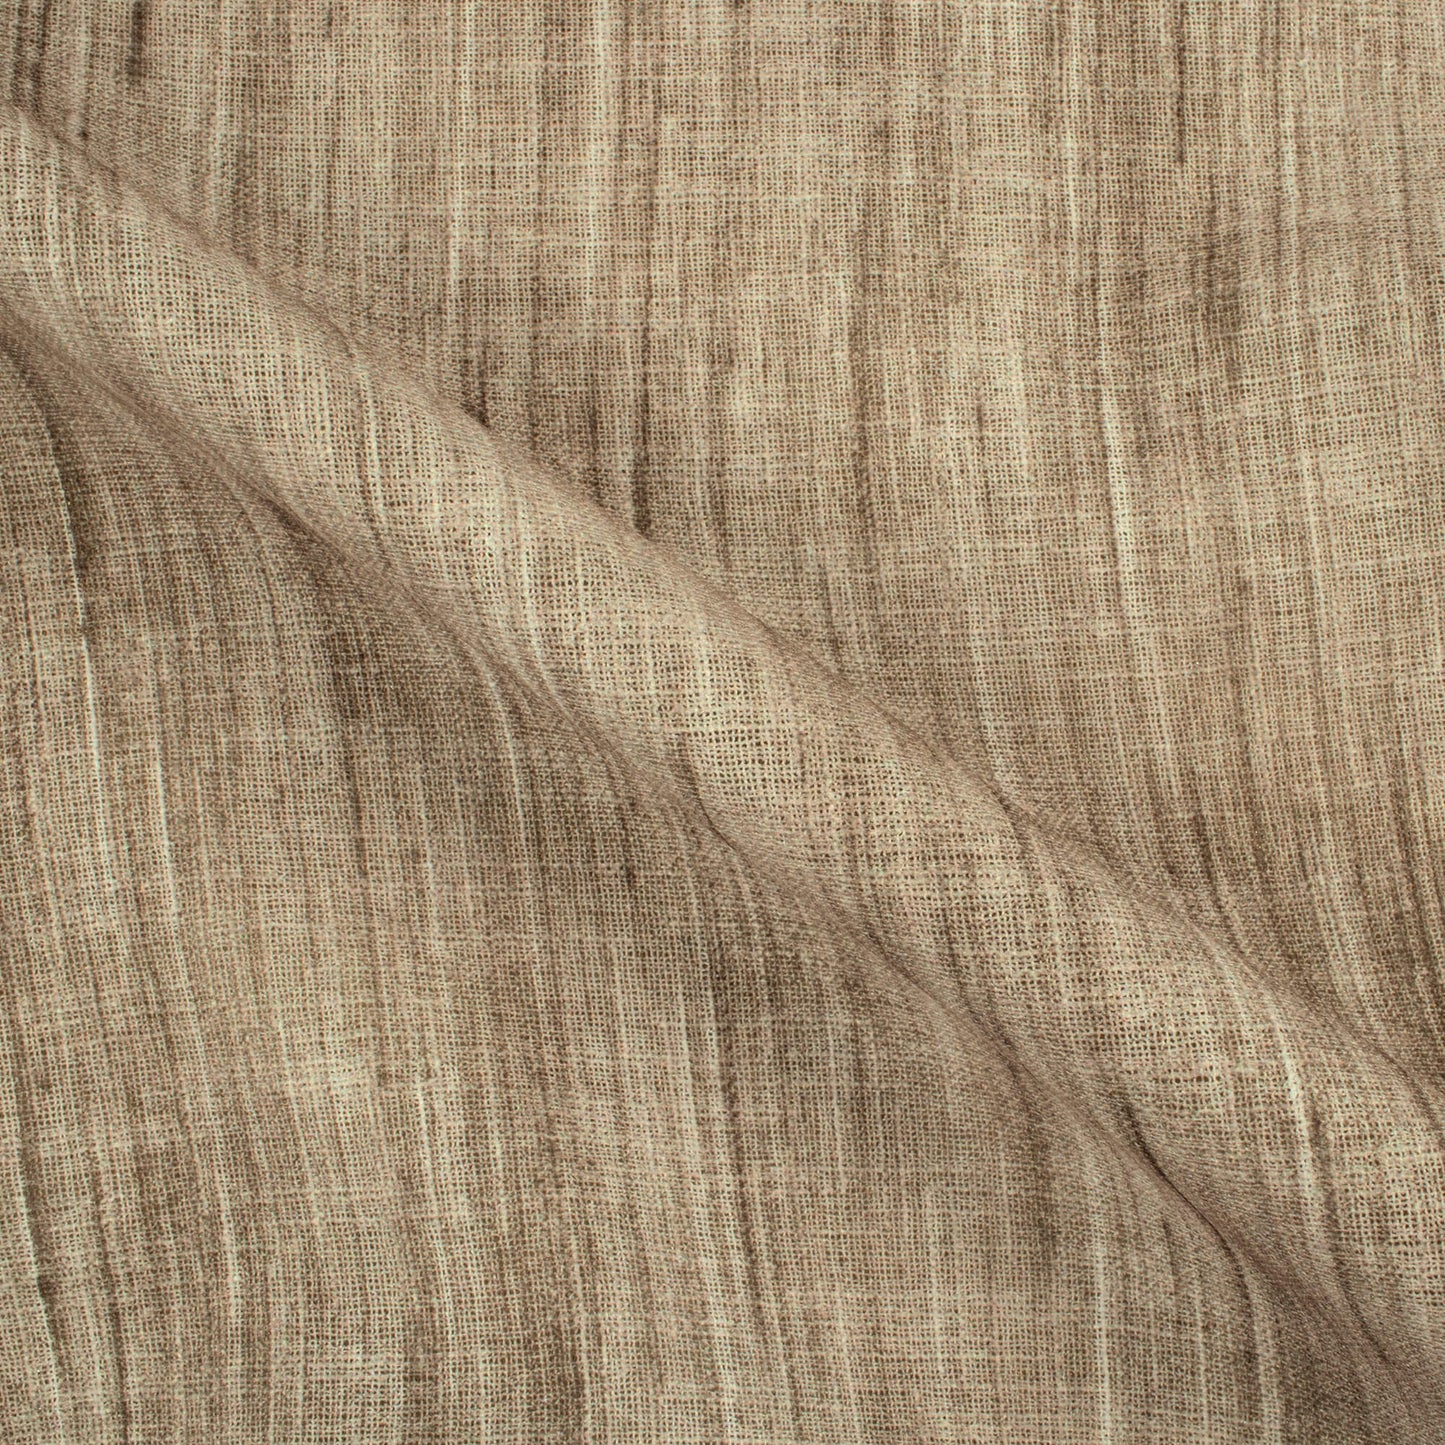 Rustic Taupe Brown Textured Premium Sheer Fabric (Width 54 Inches)